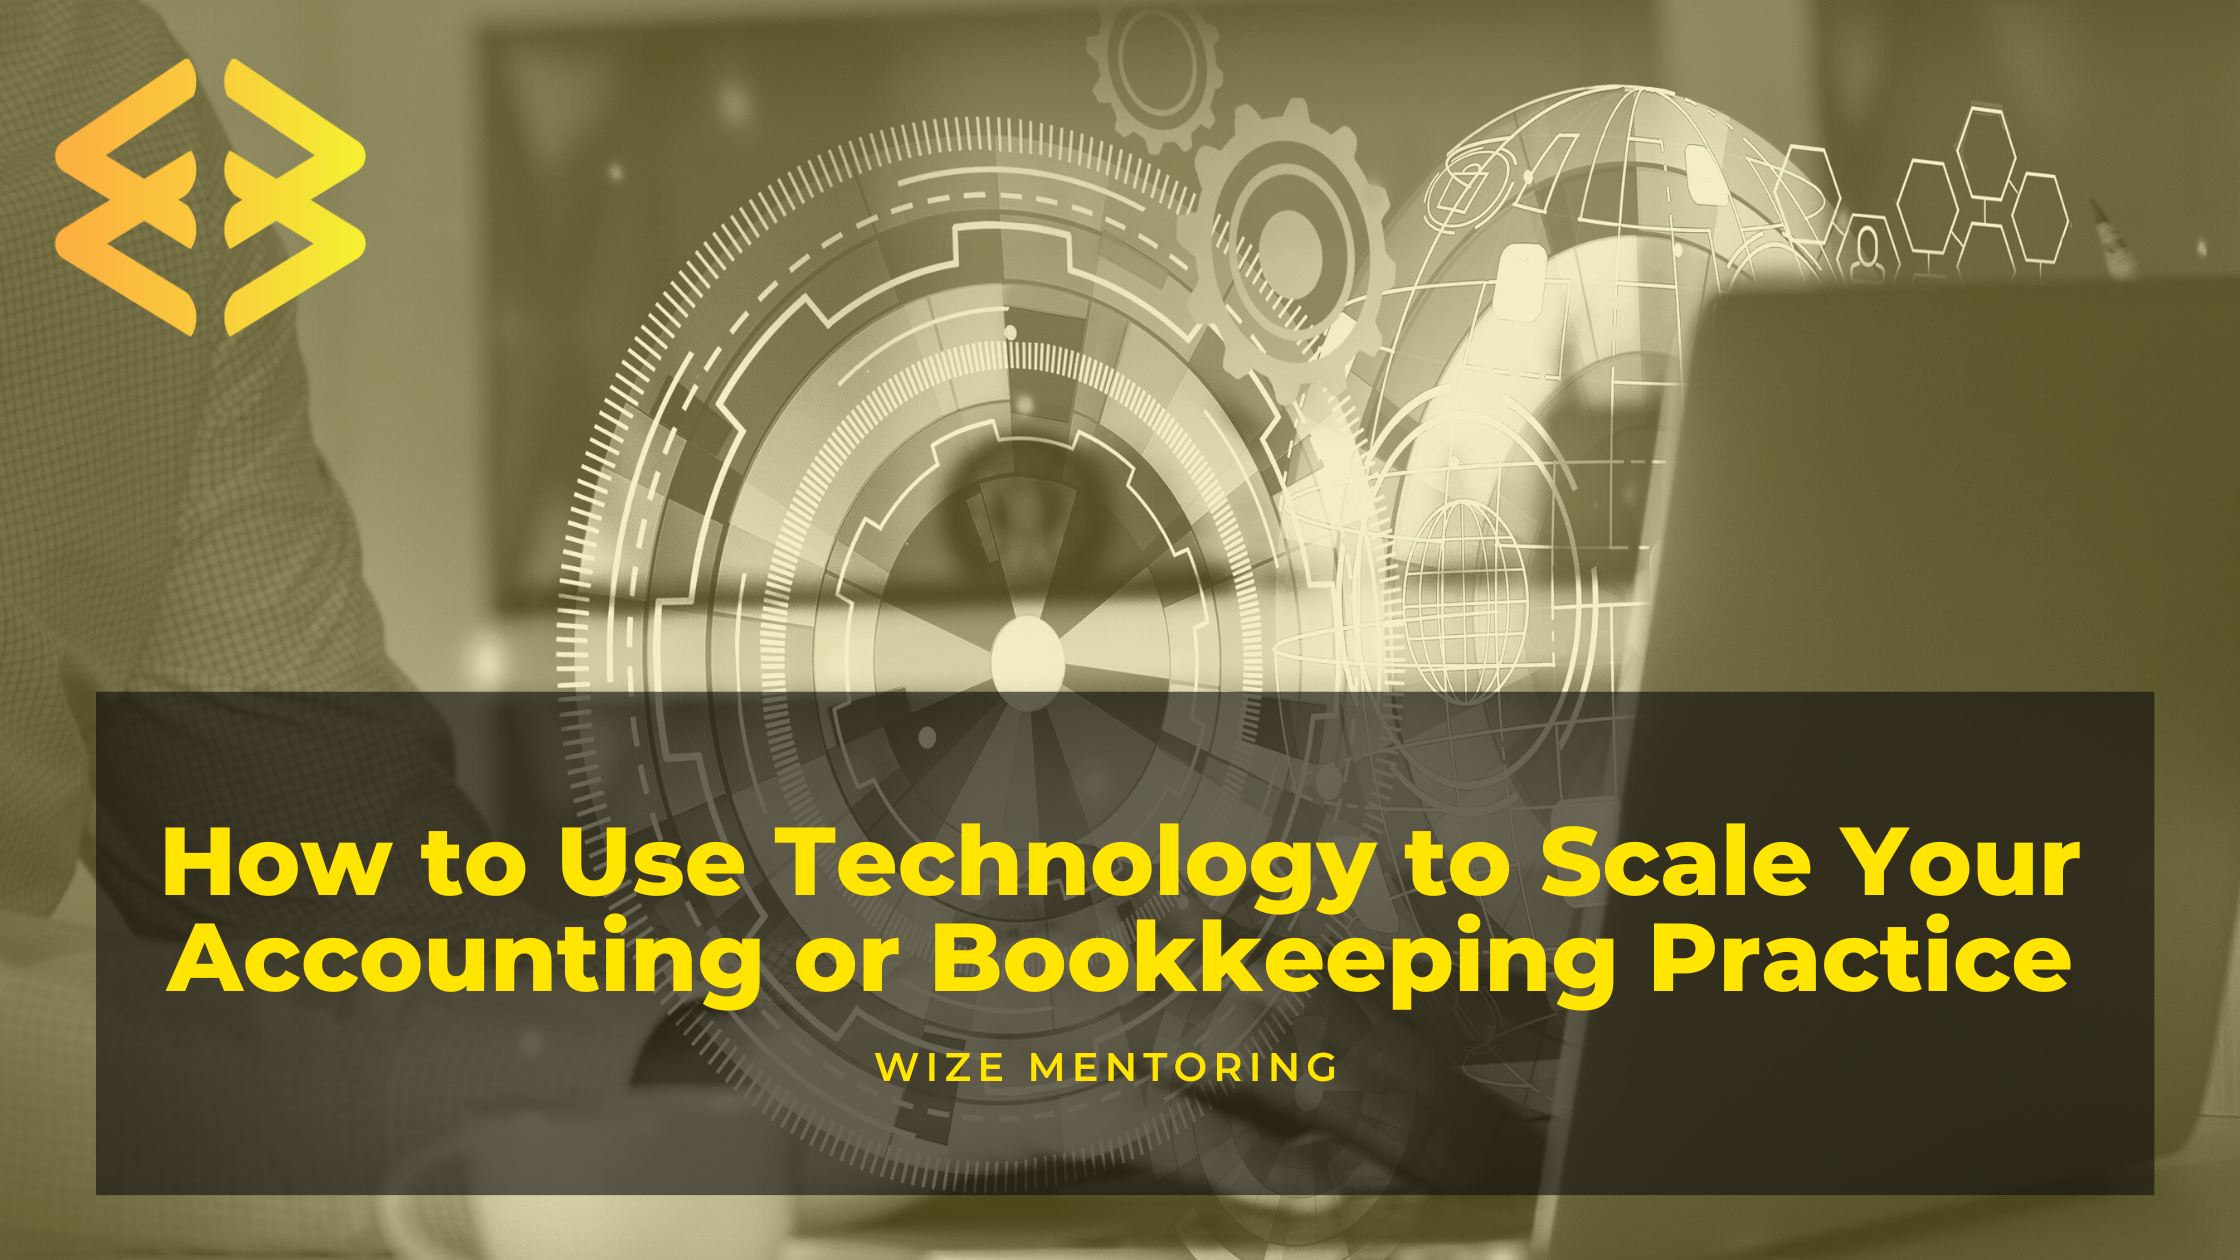 How to Use Technology to Scale Your Accounting or Bookkeeping Practice